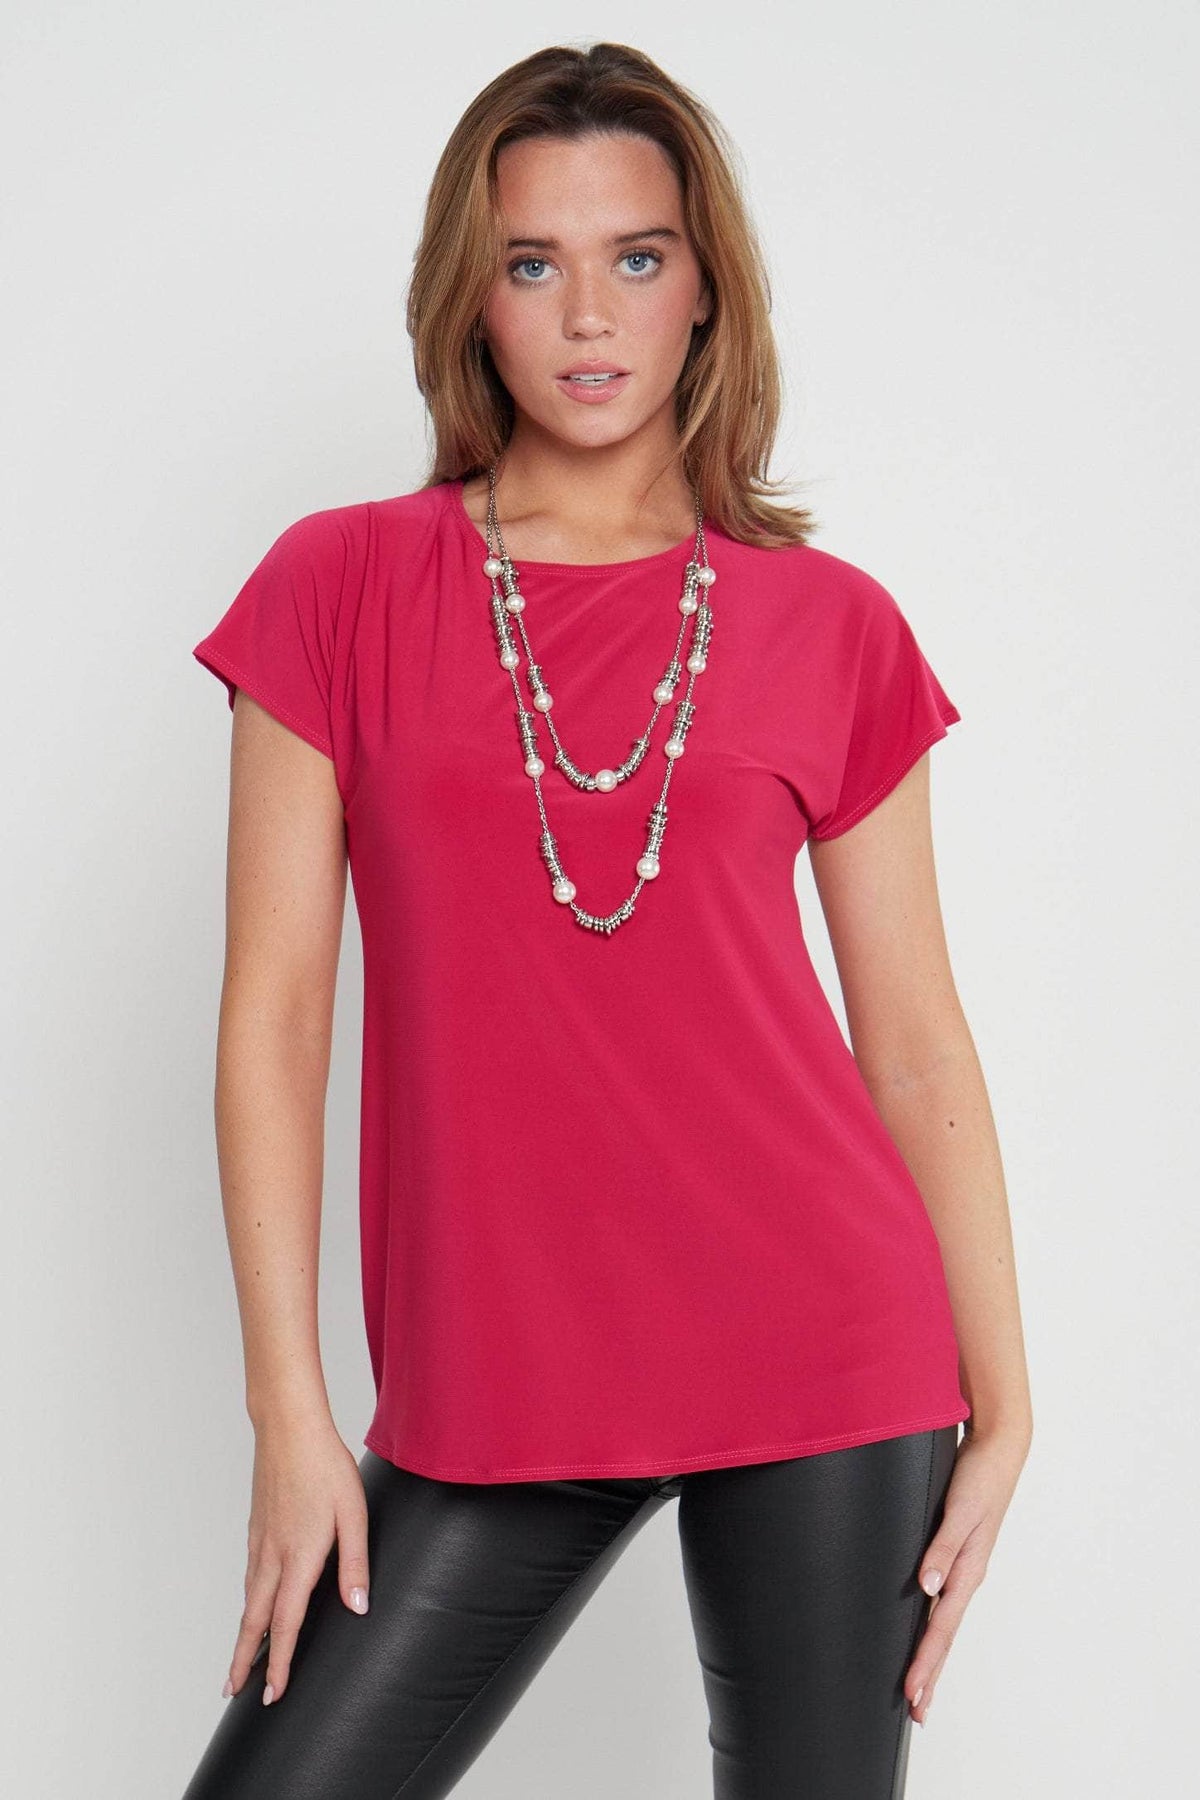 Saloos Top Poppy / 12 Essential Extended-Shoulder Top with Necklace